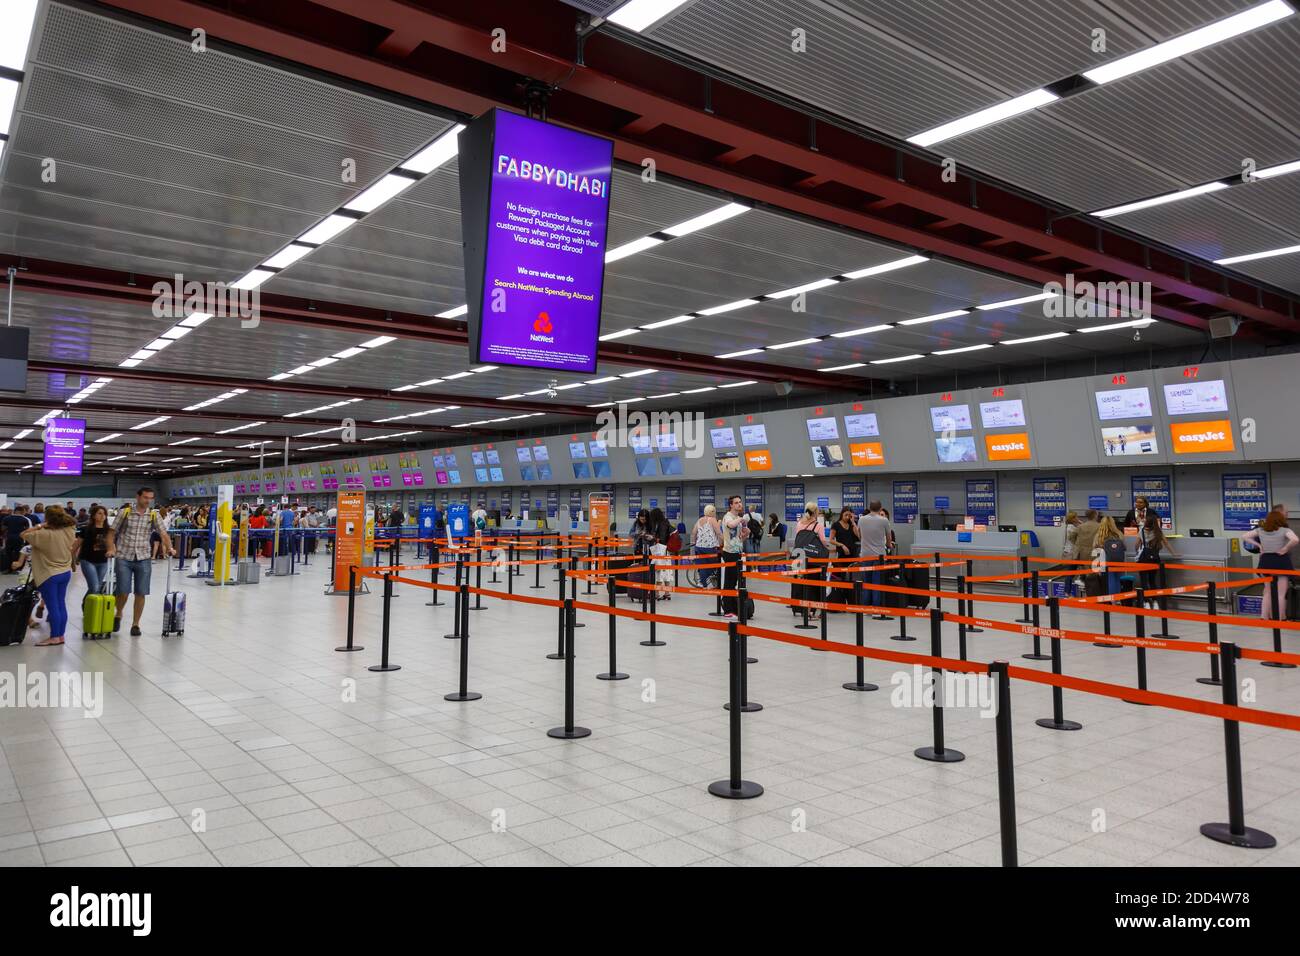 Luton, United Kingdom - July 8, 2019: Terminal of London Luton Airport in the United Kingdom. Stock Photo